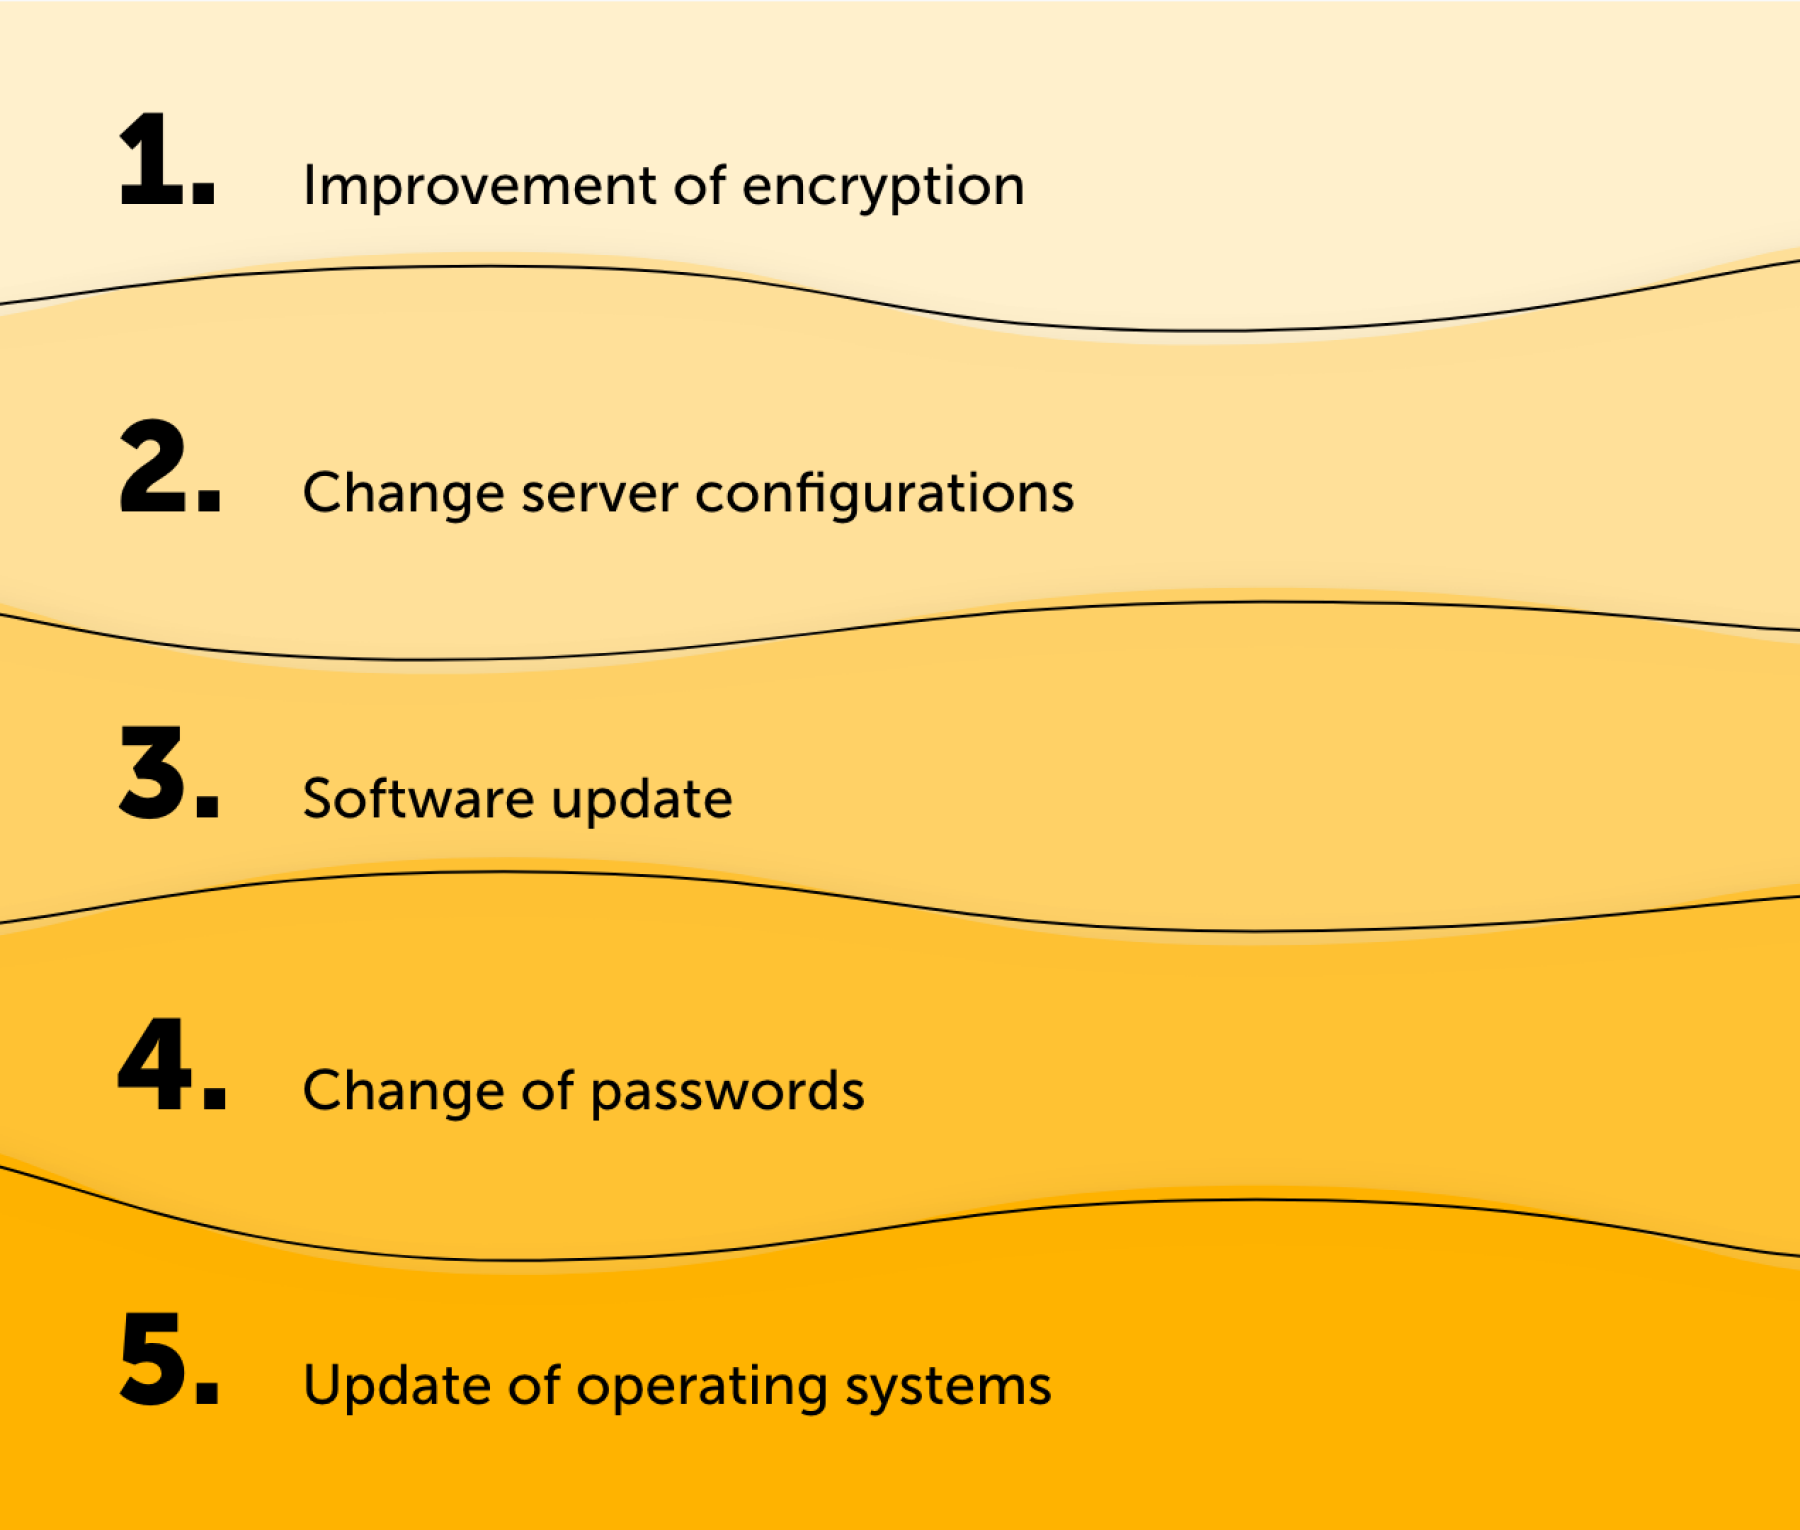 Most frequently implemented measures in 2021: 1. improve encryption, 2. change server configuration, 3. update software, 4. change password, 5. update operating system.